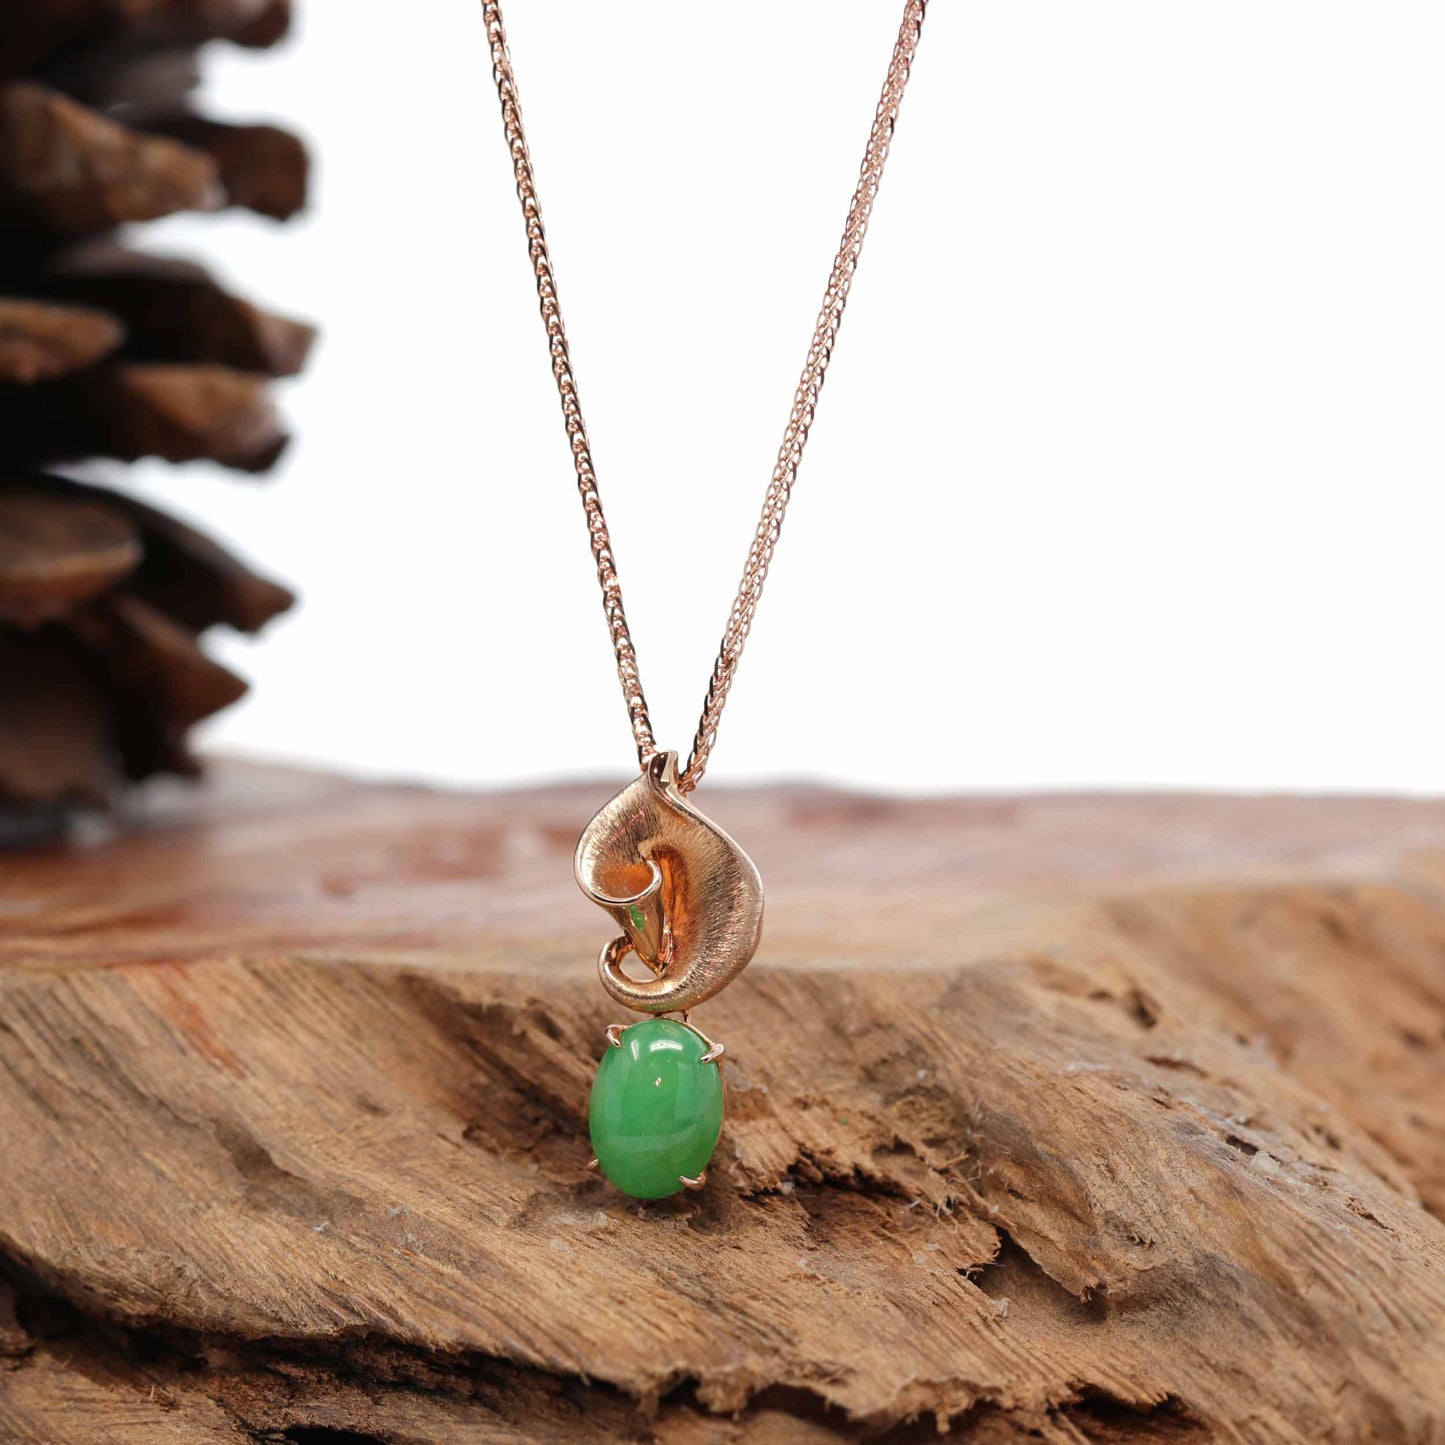 18K Rose Gold "Morning Glory" Imperial Jadeite Jade Cabochon Necklace with Diamonds